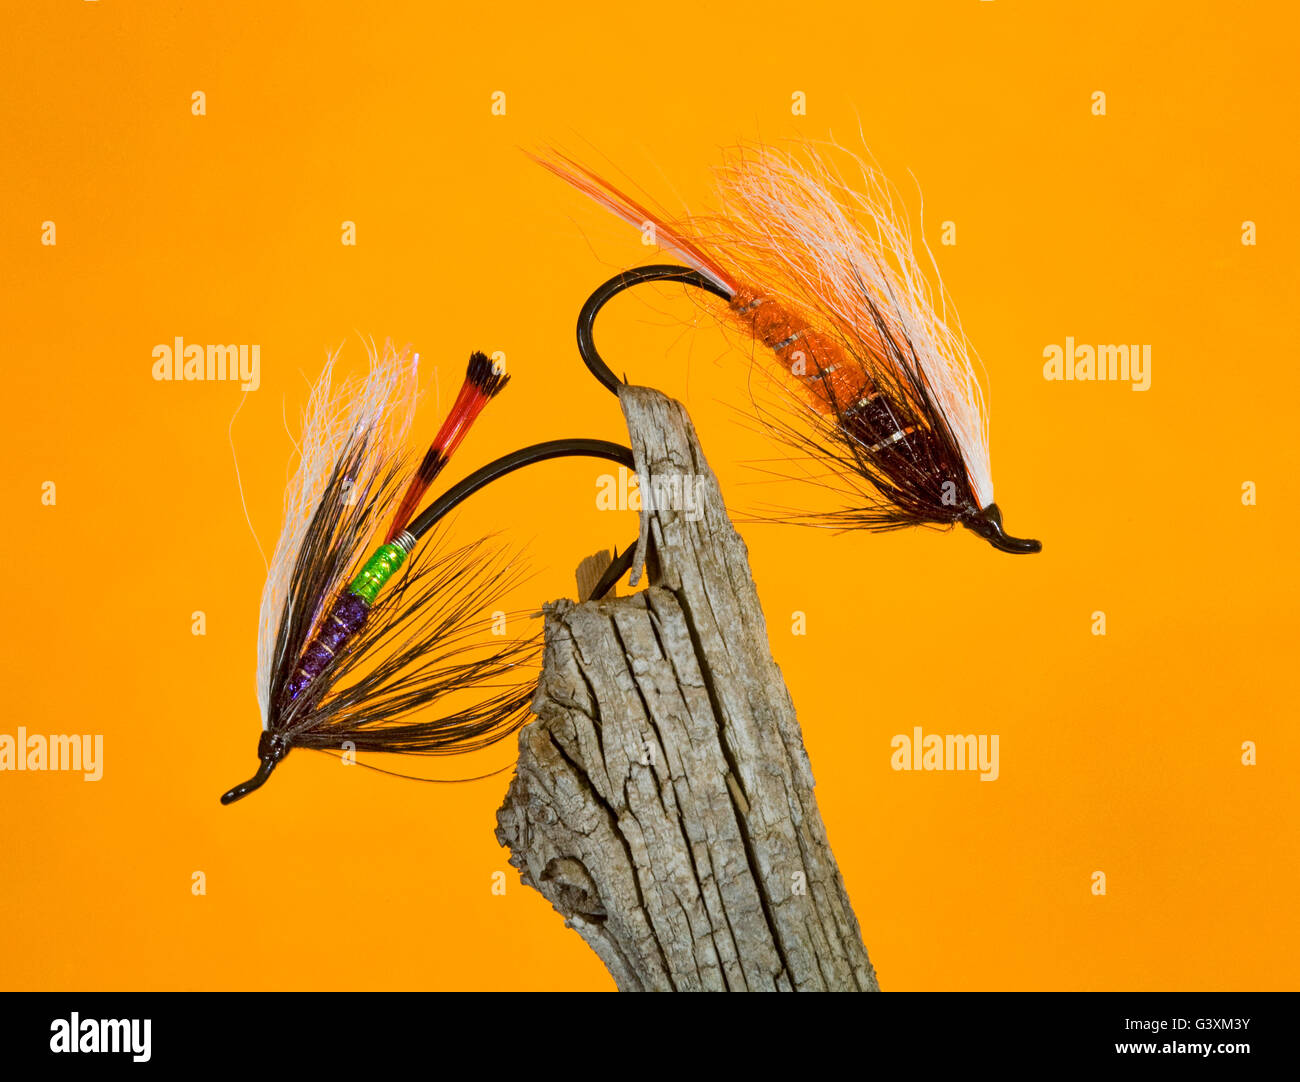 Hand-tied artificial steelhead fishing flies from the Pacific Northwest Stock Photo